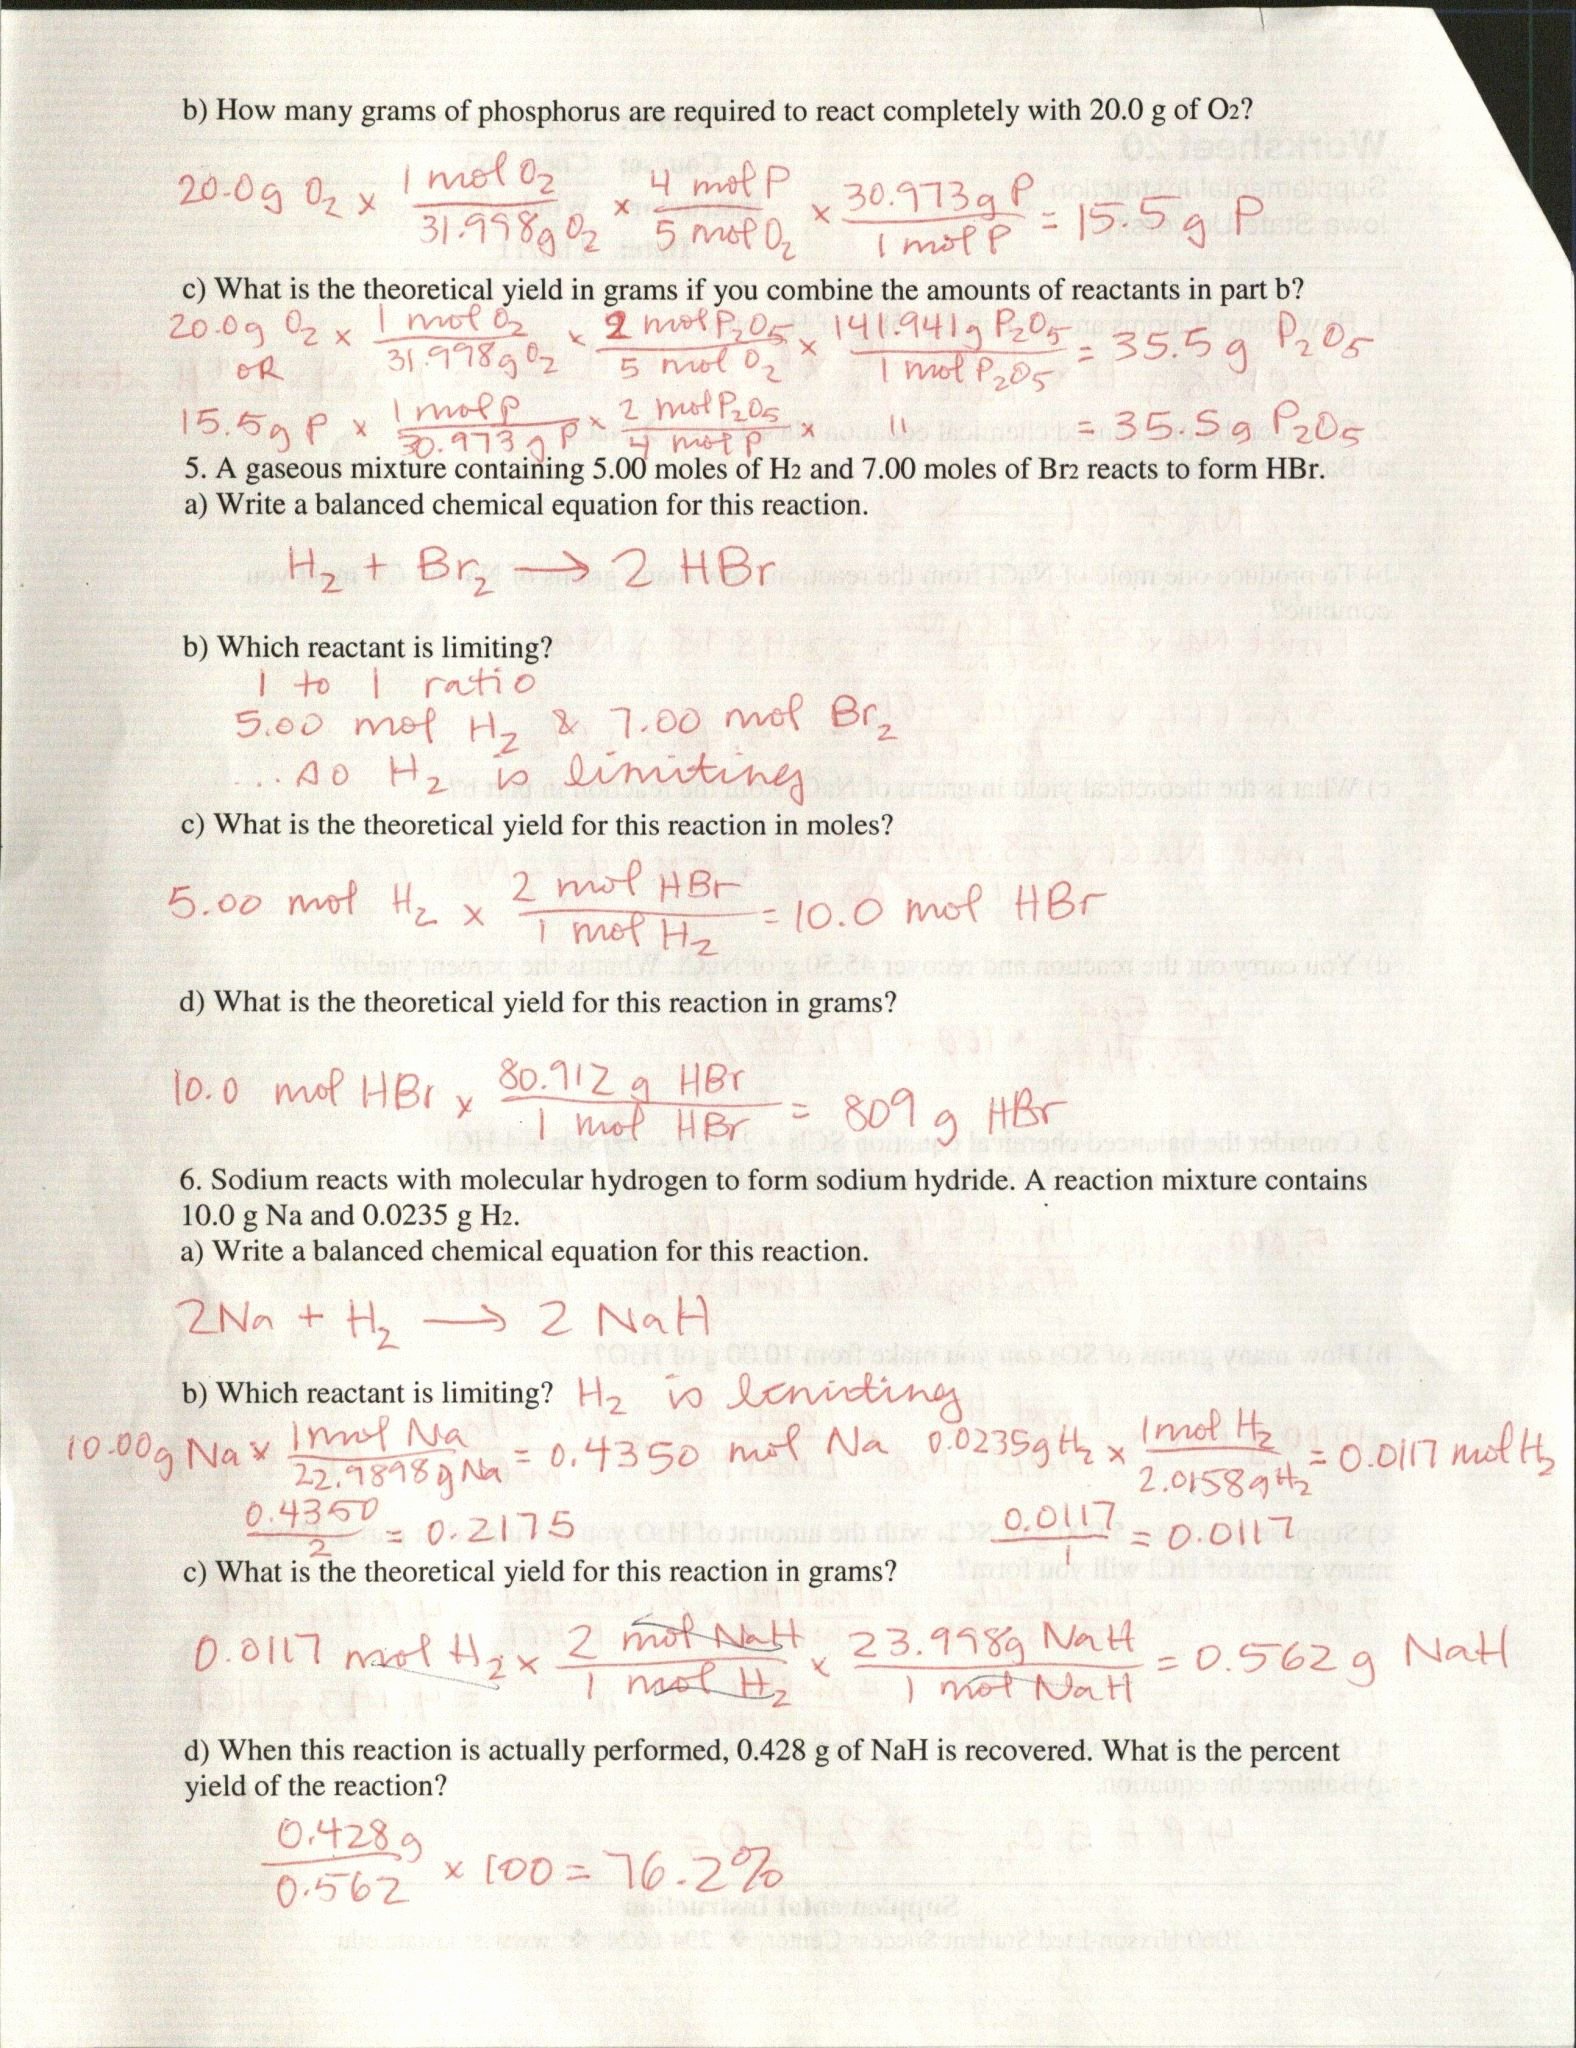 Atomic Structure Worksheet Answers Key Inspirational atomic Structure Review Worksheet Answer Key